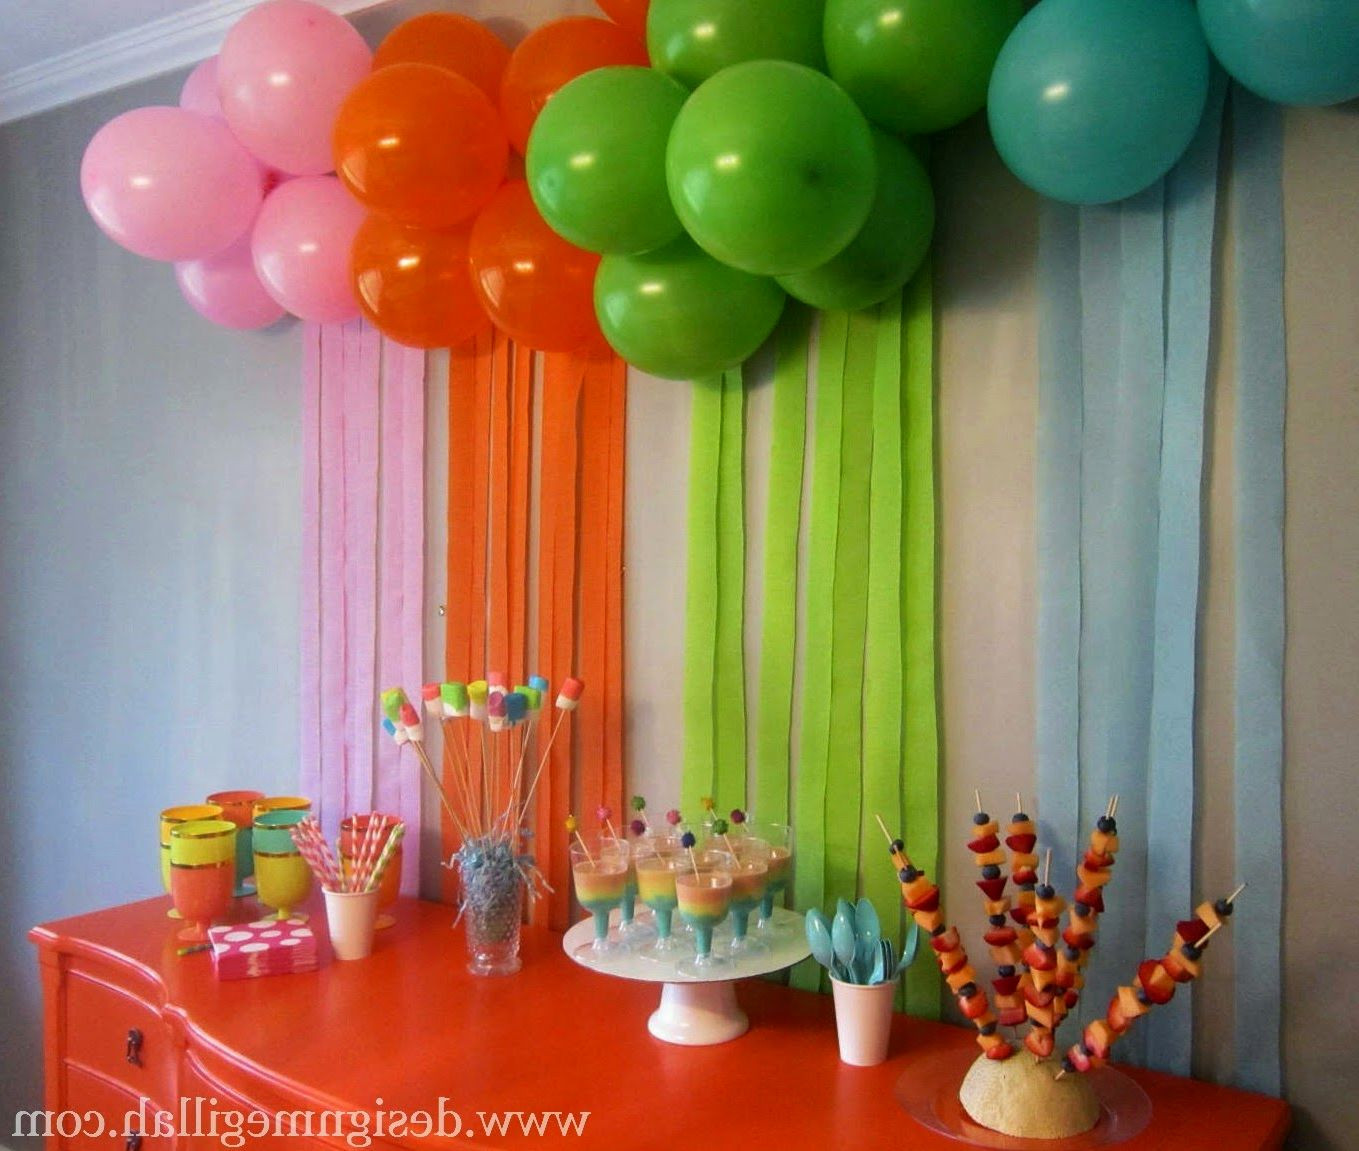 Birthday Party Decoration Ideas Simple
 Easy Home Decorating Ideas For Birthday